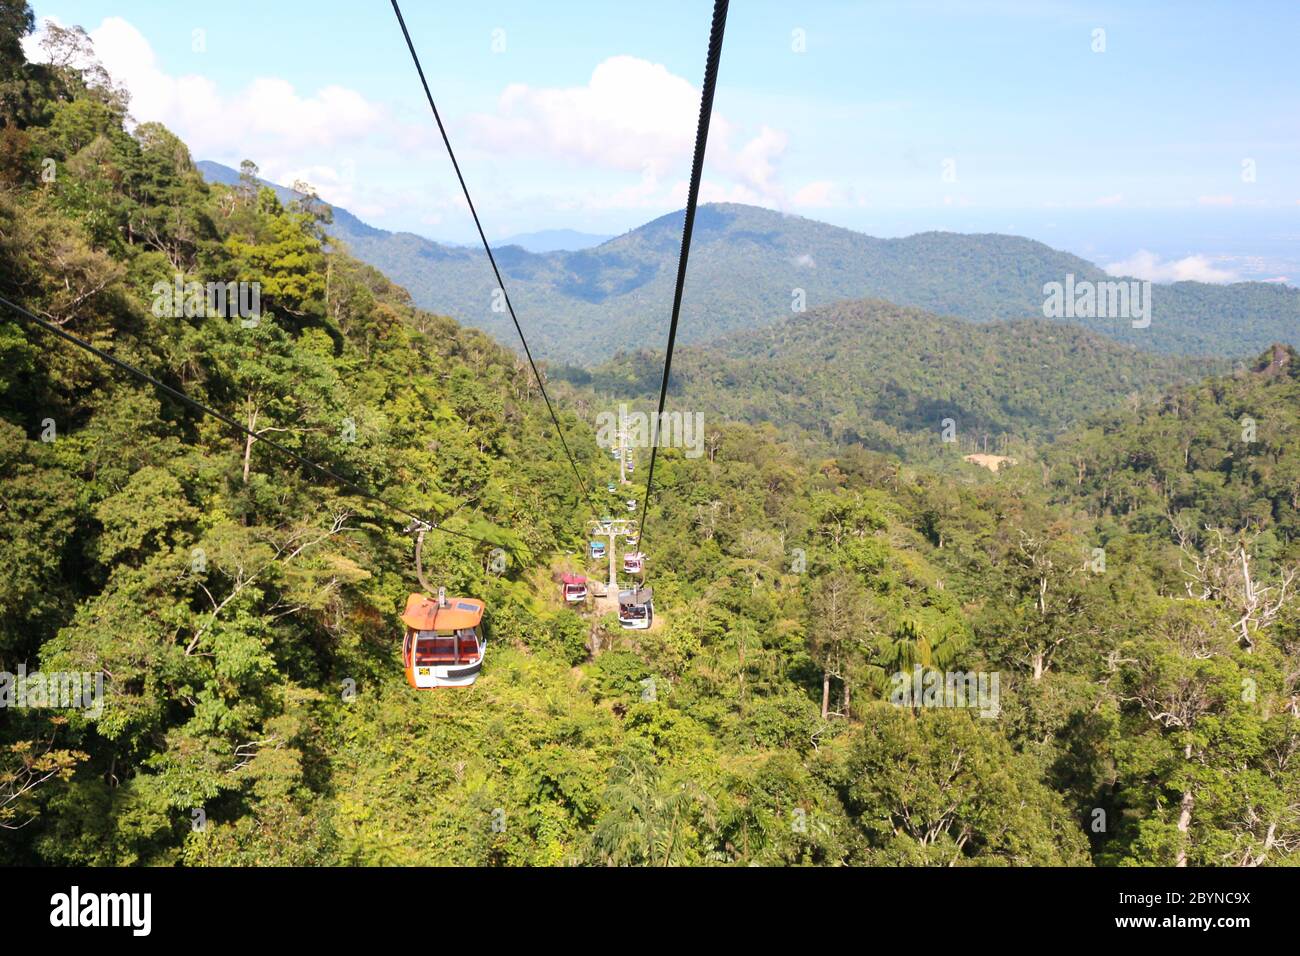 Genting Skyway Malaisie Banque D'Images